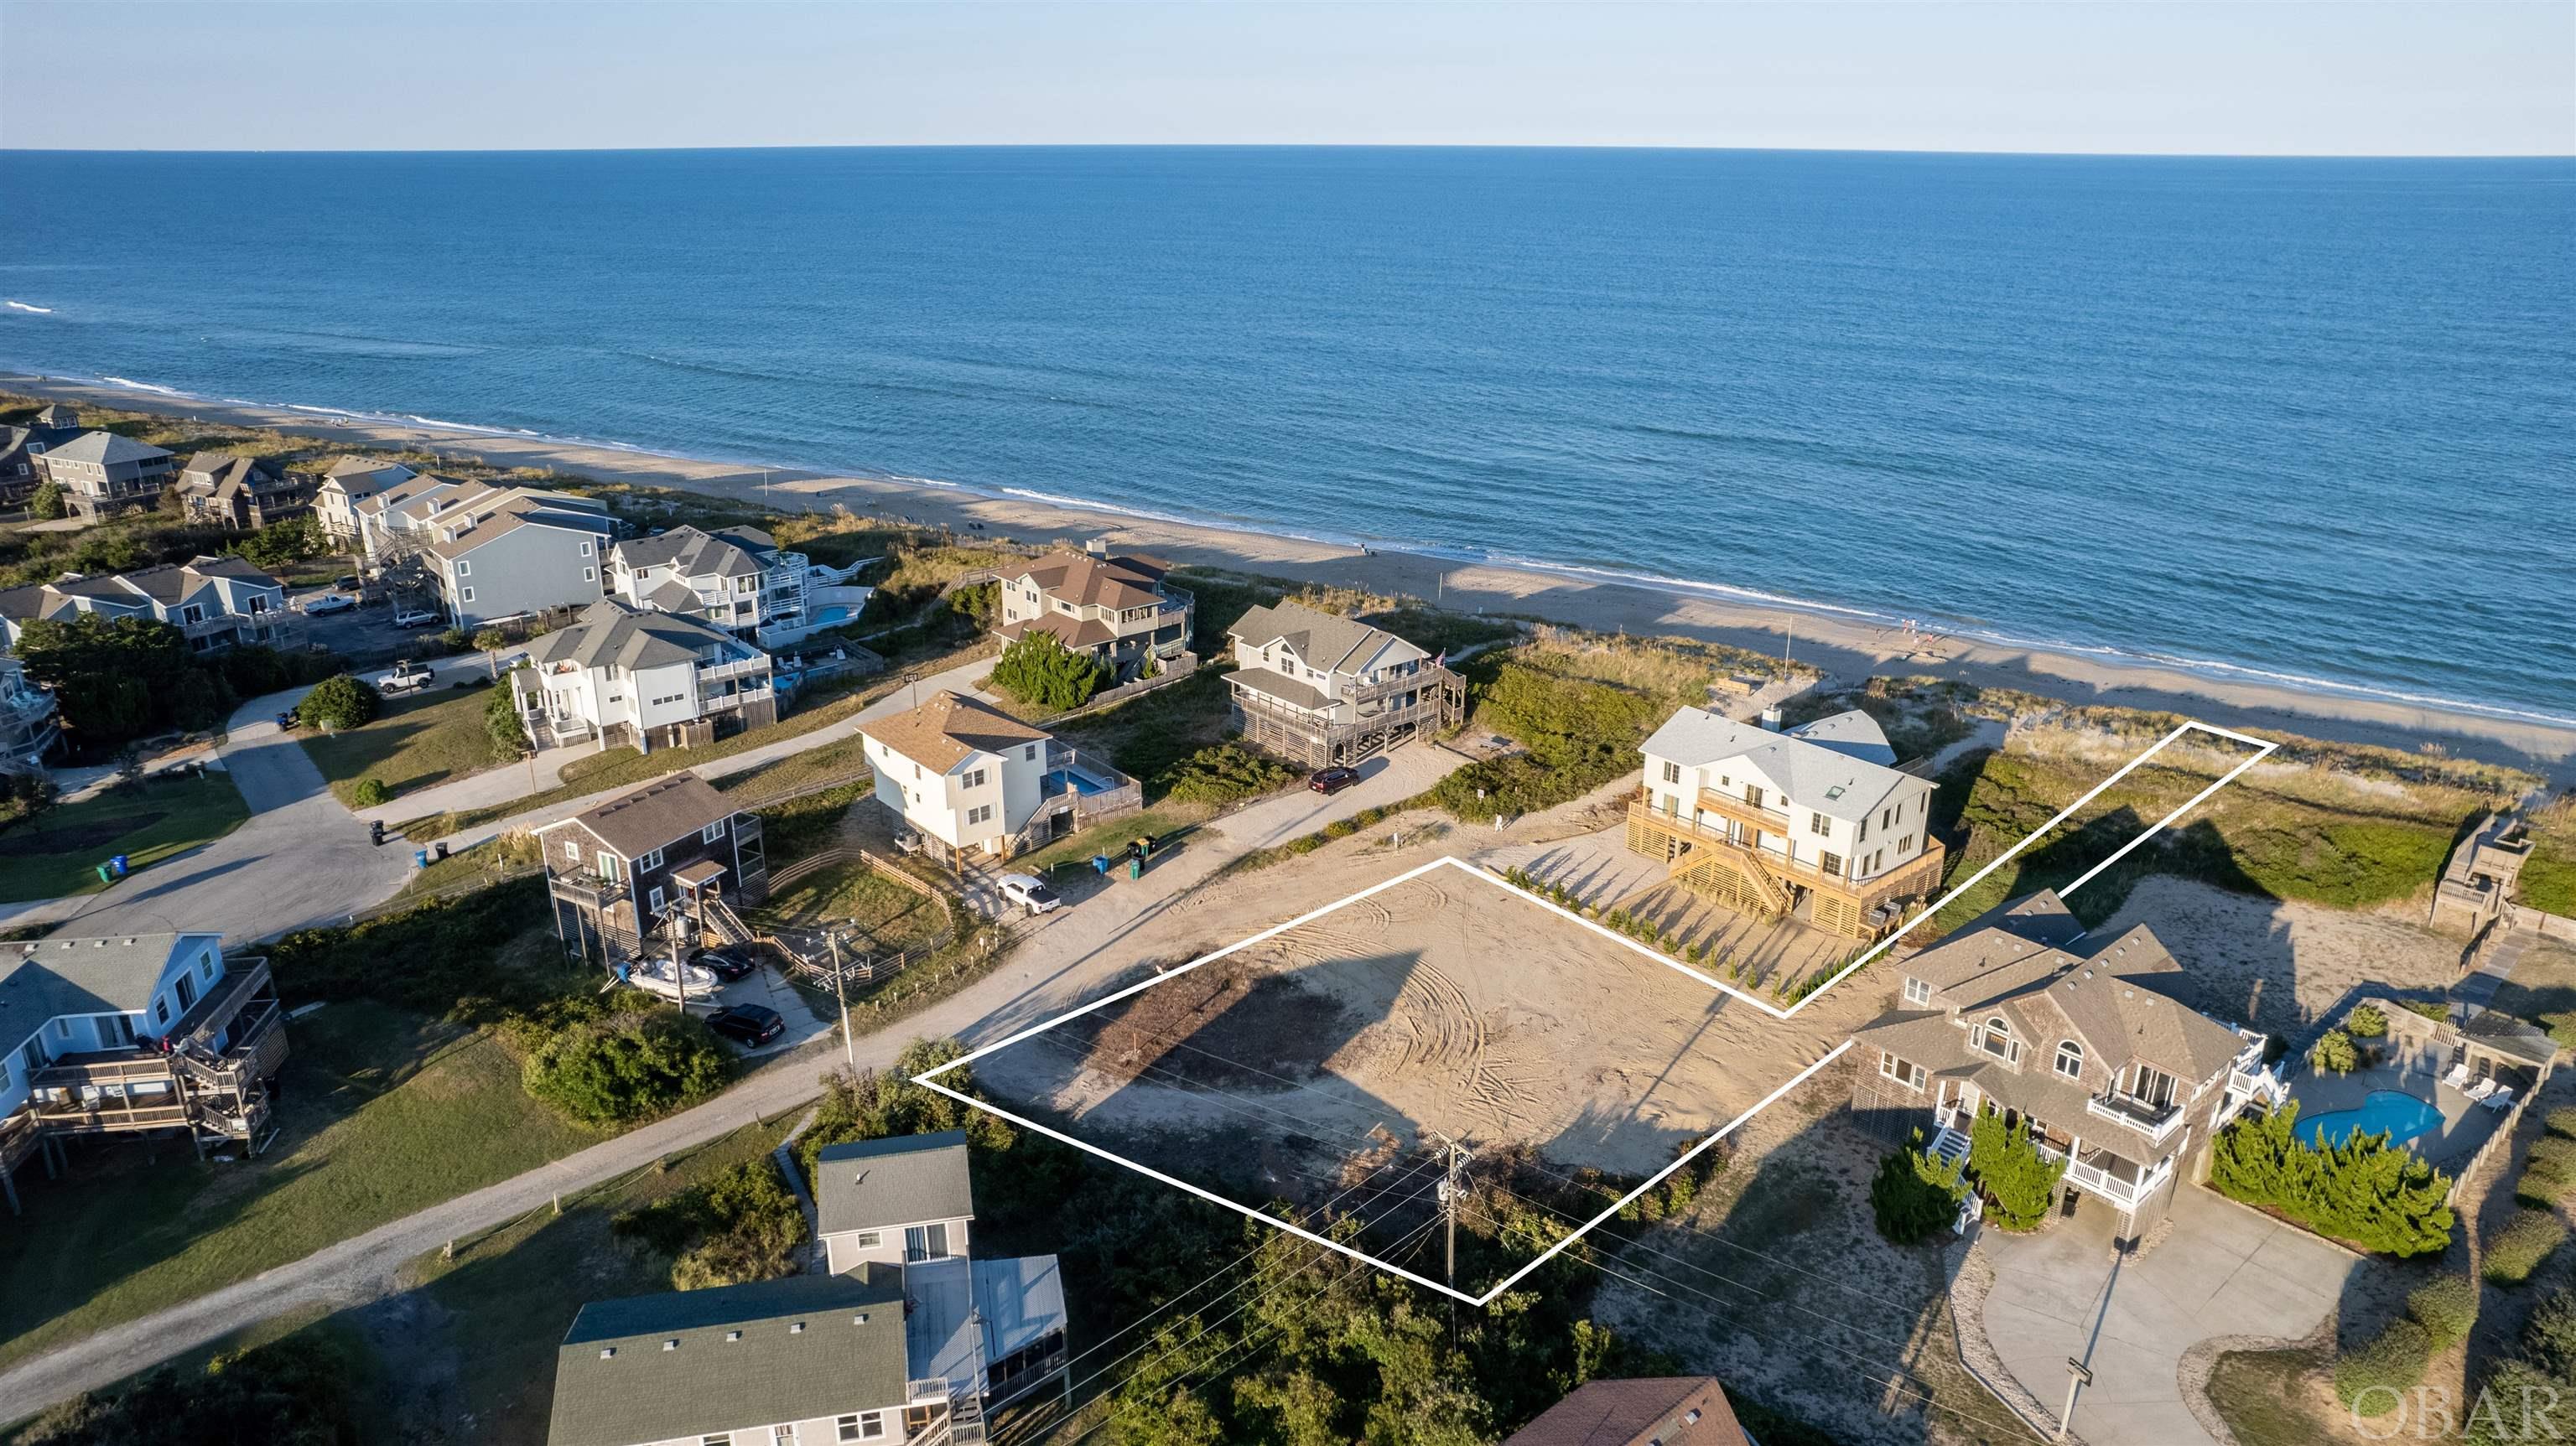 Amazing home site! This is a flag lot with 24' of deeded ocean frontage!  No roads to cross and breathtaking ocean views! Located in the quiet community of Sound Sea Village, where you will enjoy a laid back beach vibe and uncrowded beaches... the perfect spot to build your dream OBX beach home.